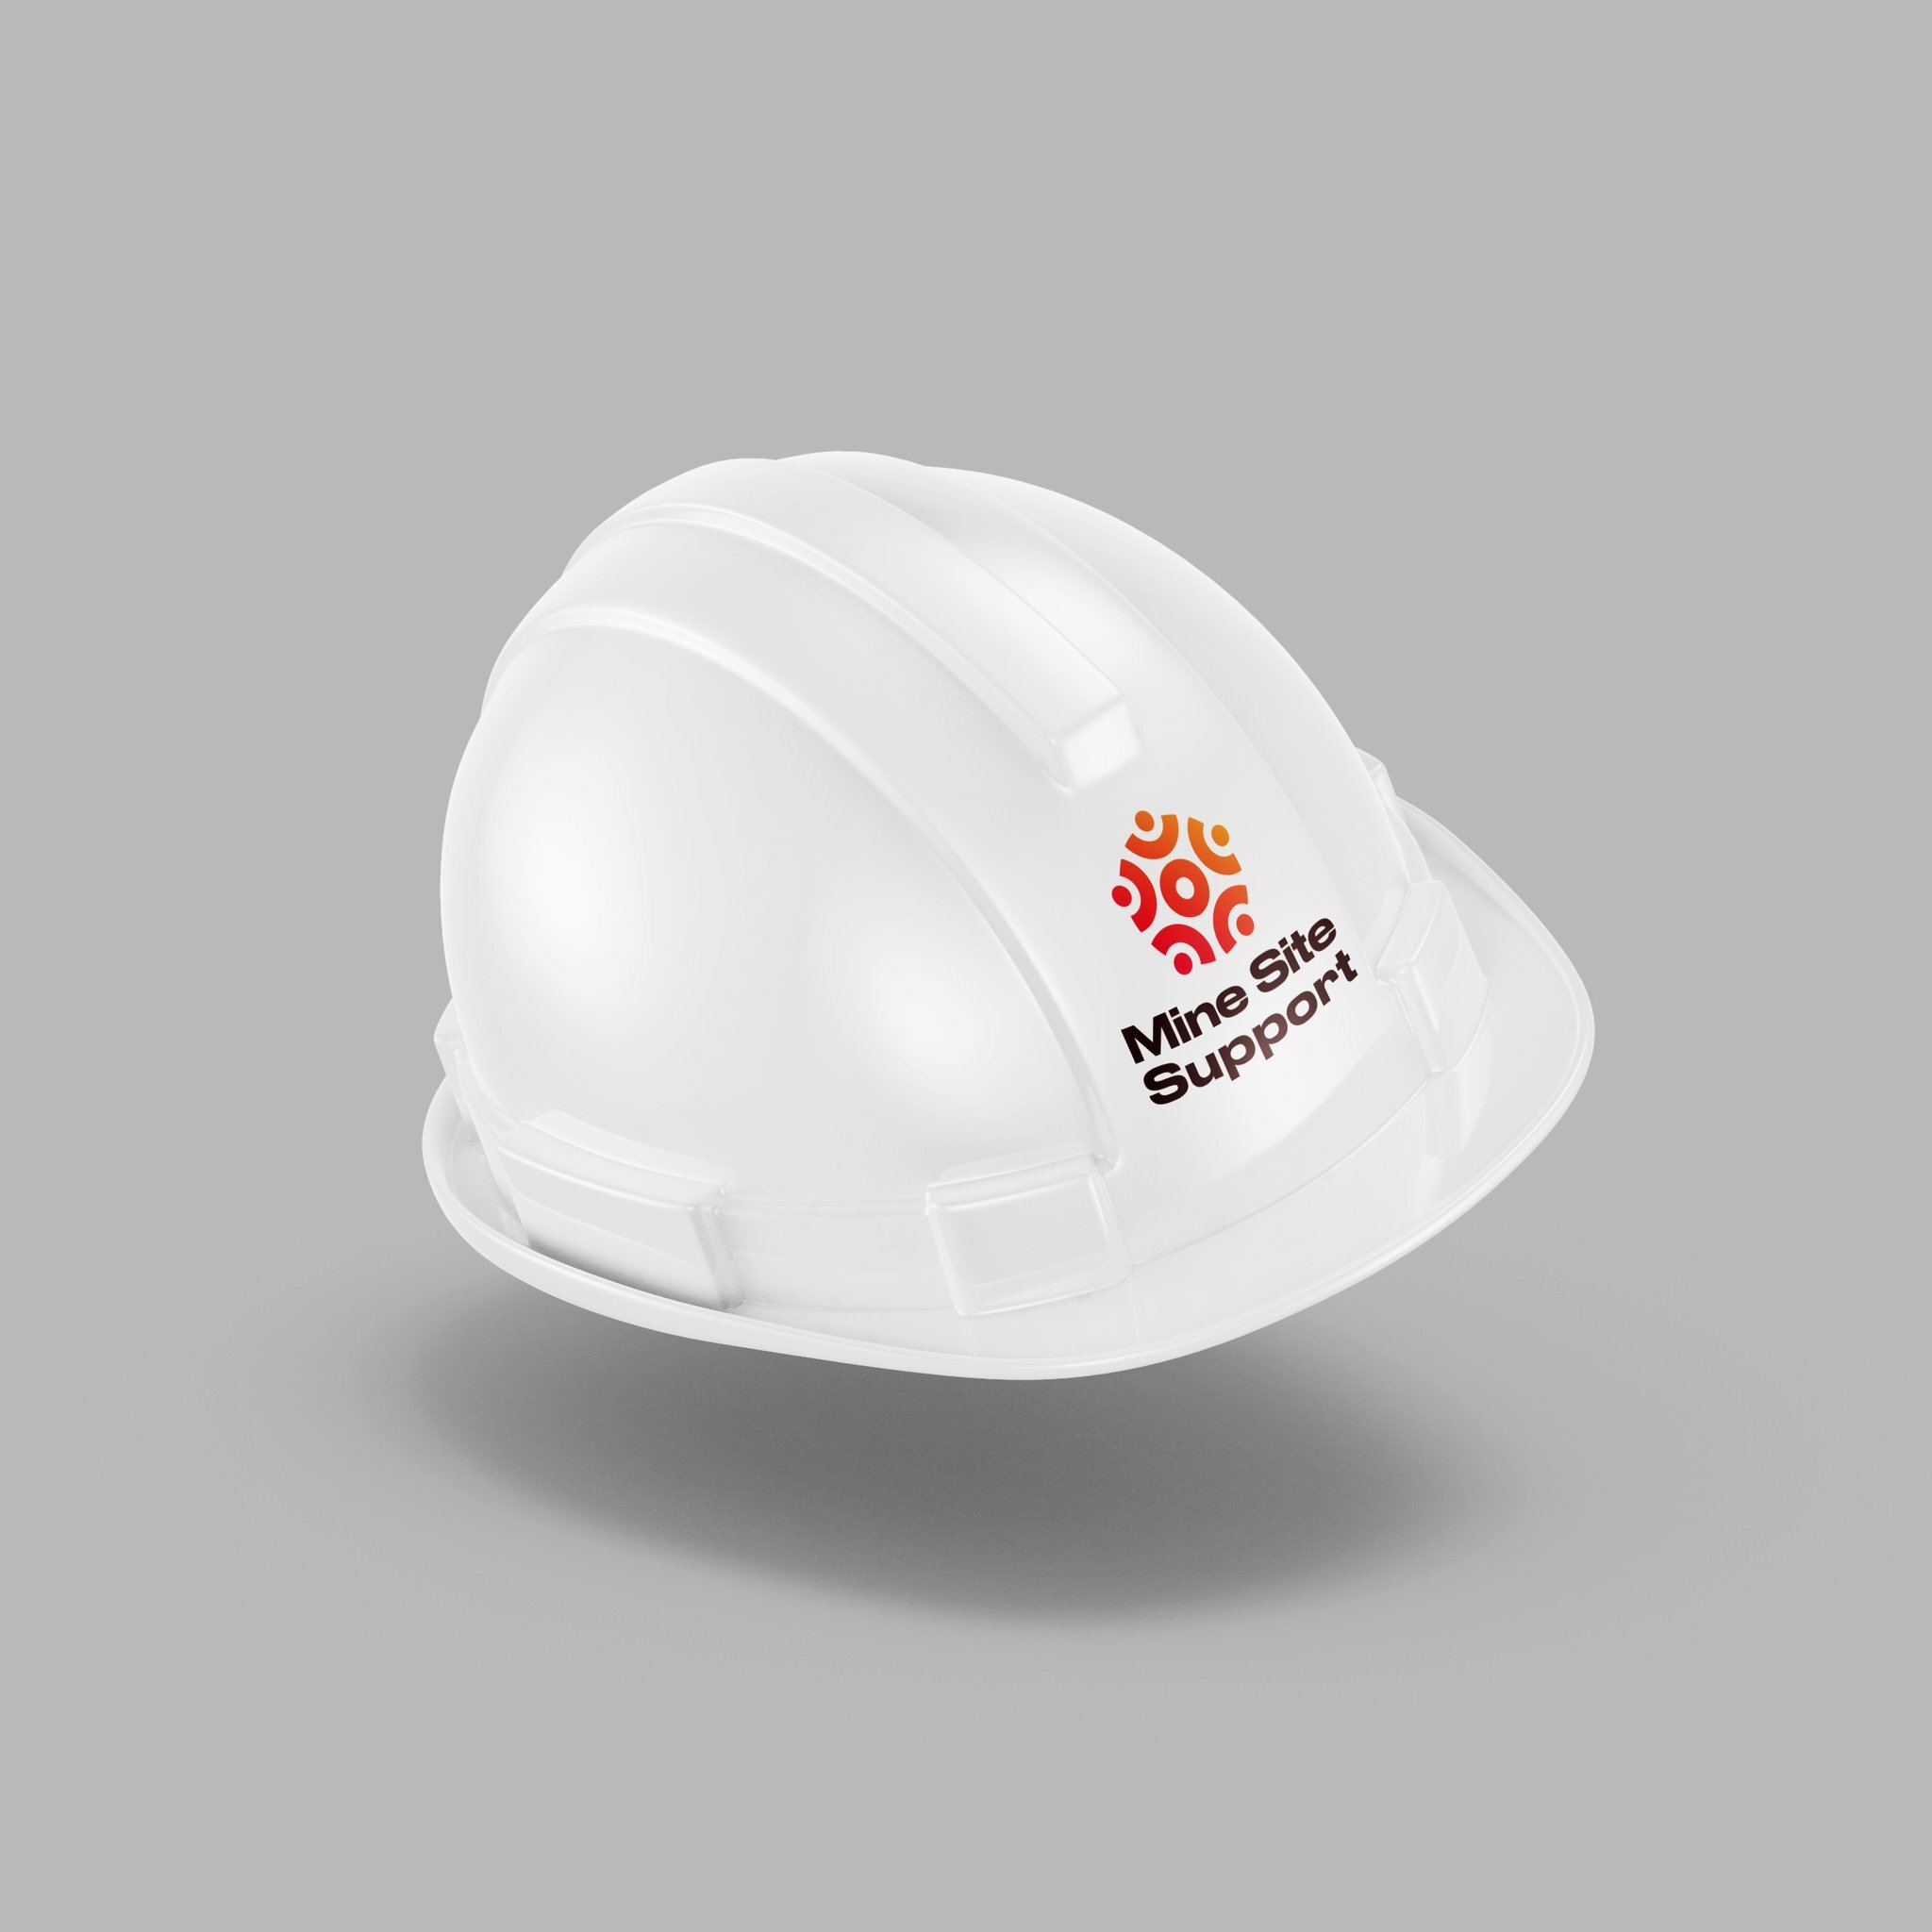 Branded hardhat mockup designed for Mine Site Support, an indigenous-owned and operated business providing safety and operational services for tier 1 mining companies and contractors in West Australia.
&bull;
&bull;
&bull;
&bull;
#branding #graphicde